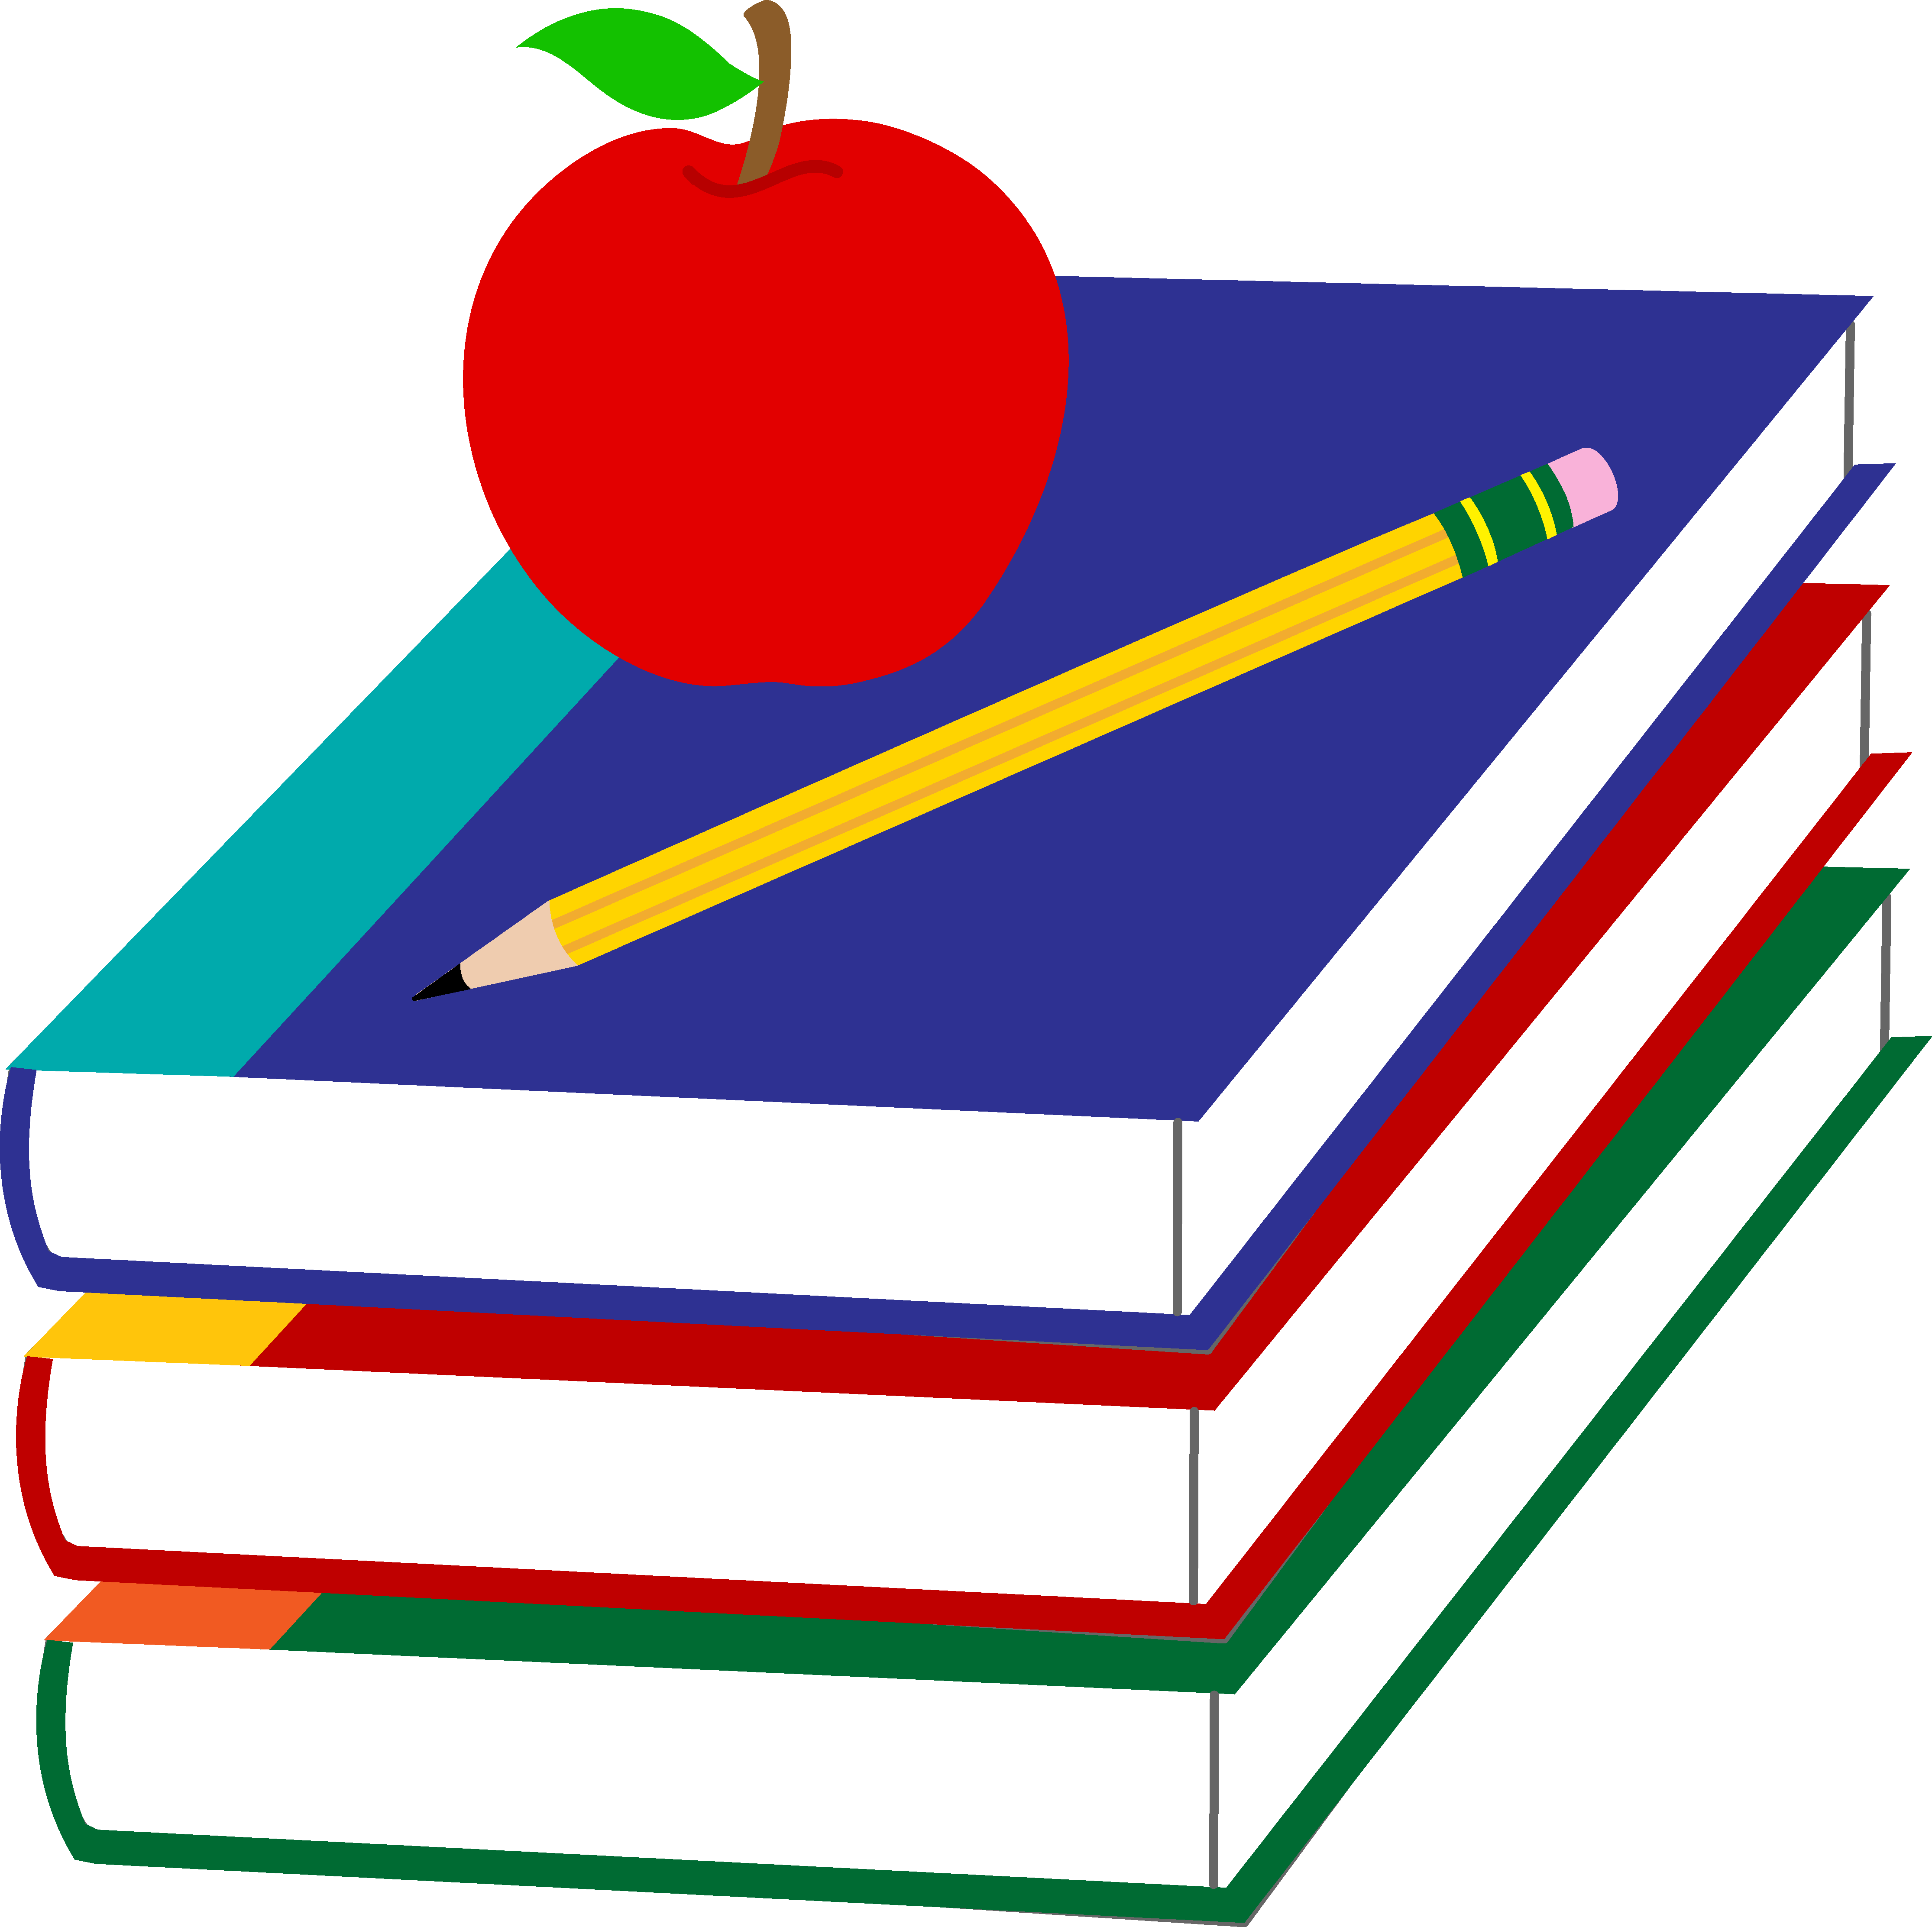 School Books With Apple And Pencil Free clipart free image